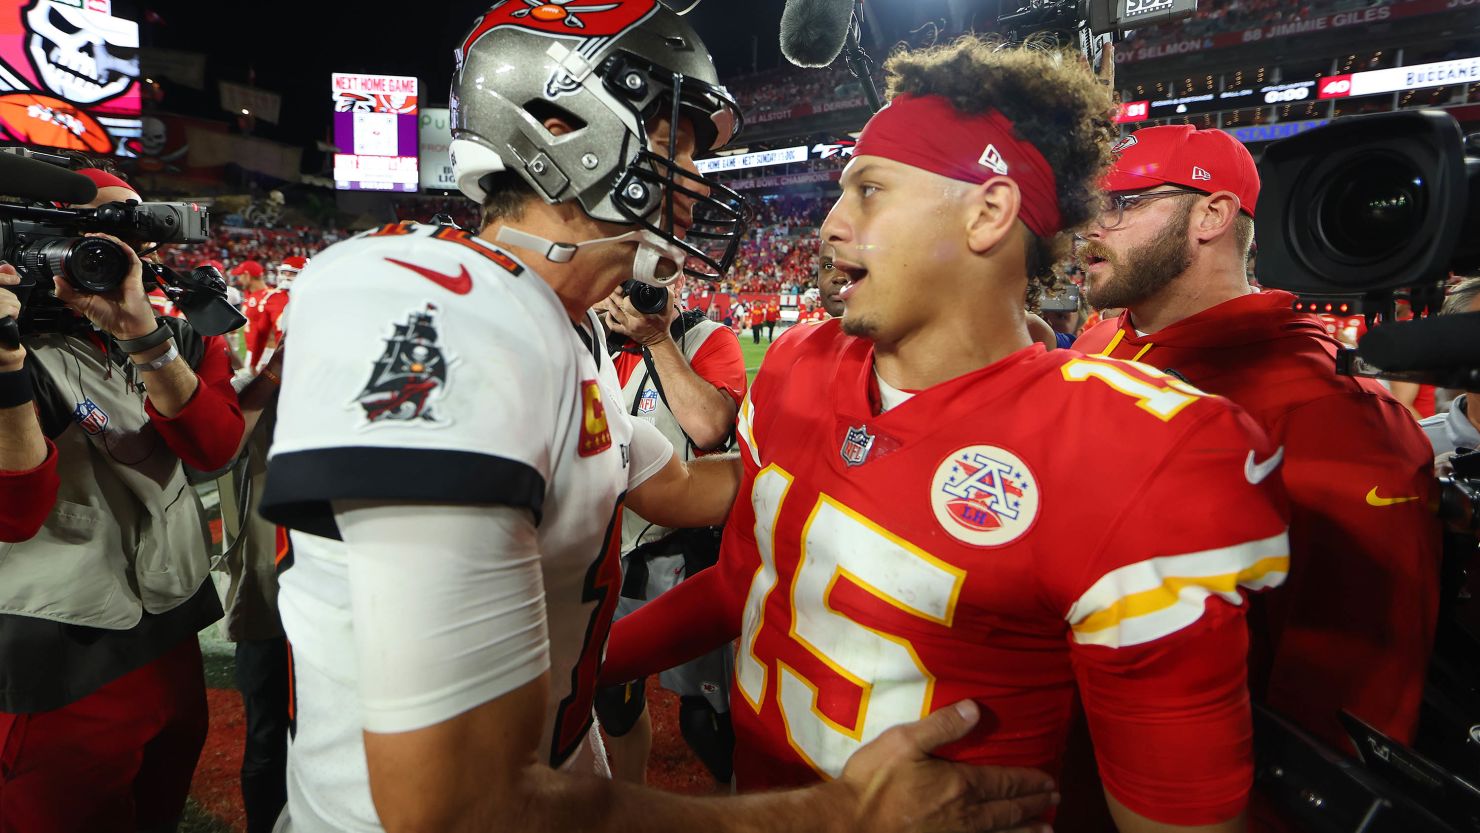 TAMPA, FLORIDA - OCTOBER 02: Patrick Mahomes #15 of the Kansas City Chiefs shakes hands with Tom Brady #12 of the Tampa Bay Buccaneers after defeating the Tampa Bay Buccaneers 41-31 at Raymond James Stadium on October 02, 2022 in Tampa, Florida. (Photo by Mike Ehrmann/Getty Images)